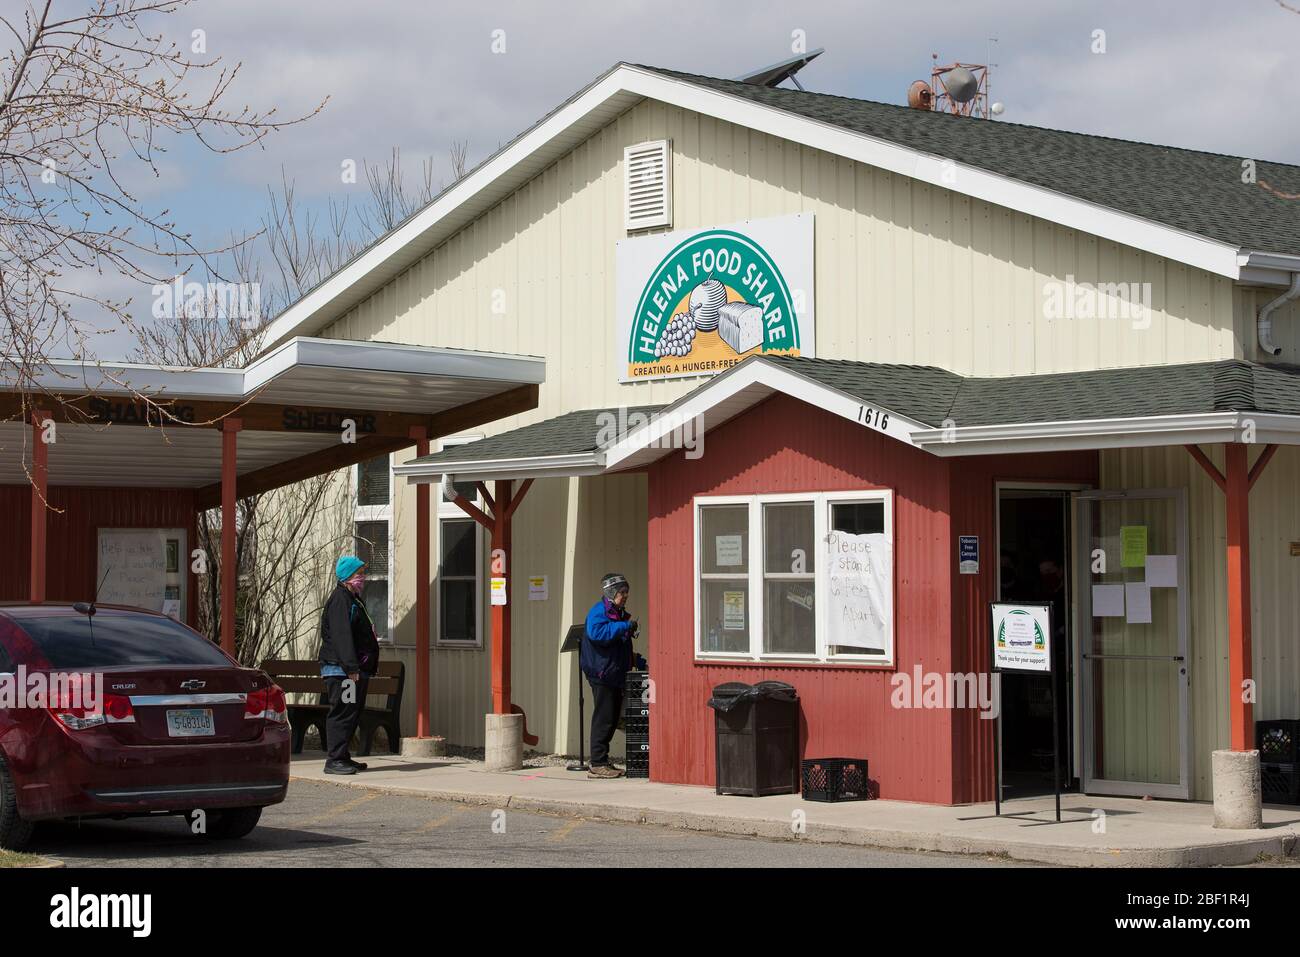 Helena, Montana - April 16, 2020: Two caucasian women wearing masks wait in line at Helena Food Share for groceries to meet needs during Coronavirus. Stock Photo